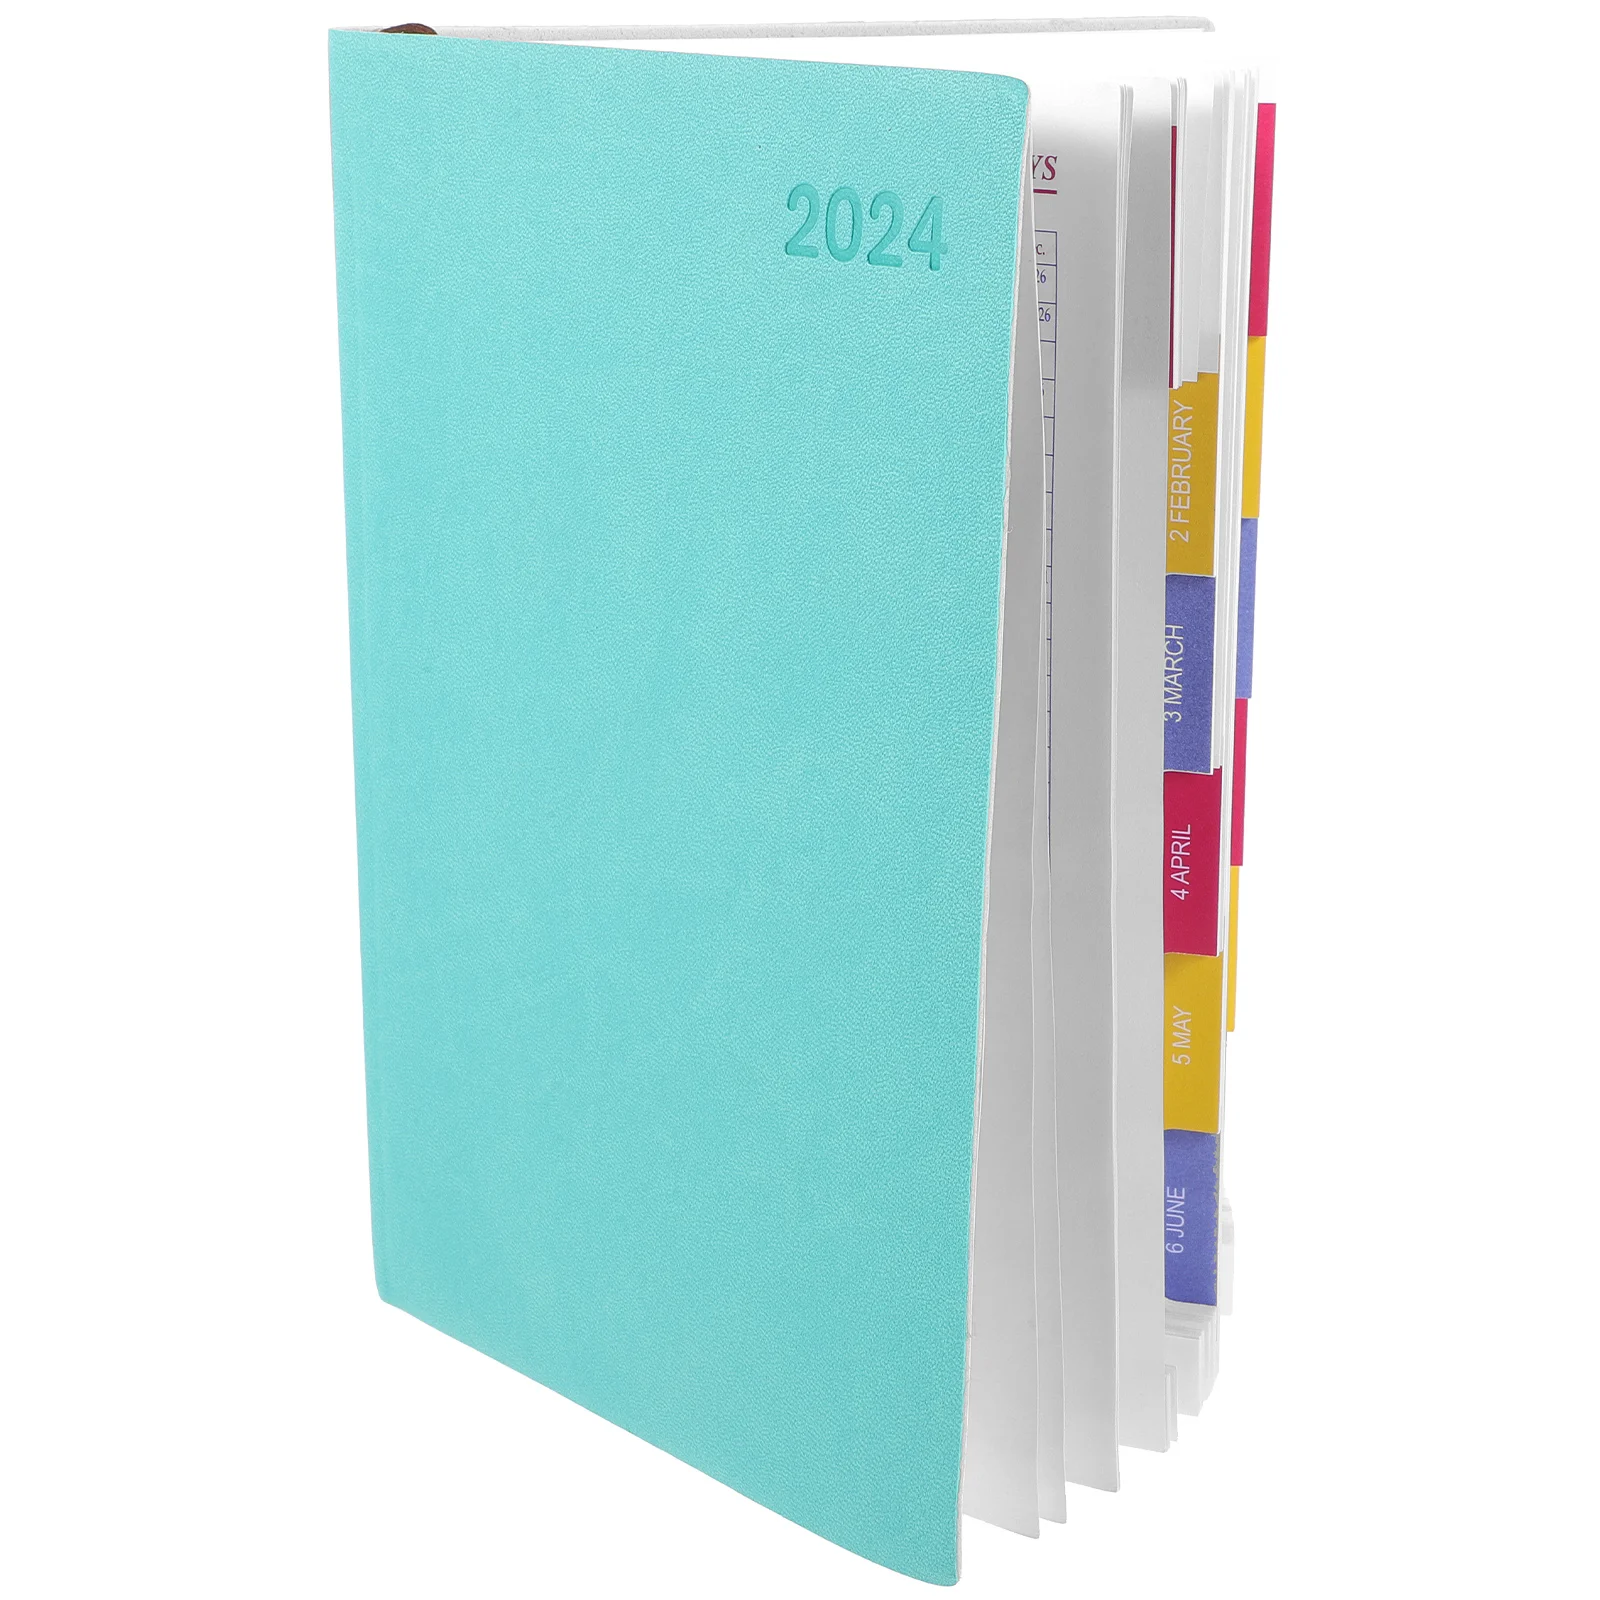 

2024 Agenda Book Planner Year Notepad Portable Work Delicate Notebook Paper Business Planning Spiral Notebooks 2023/24